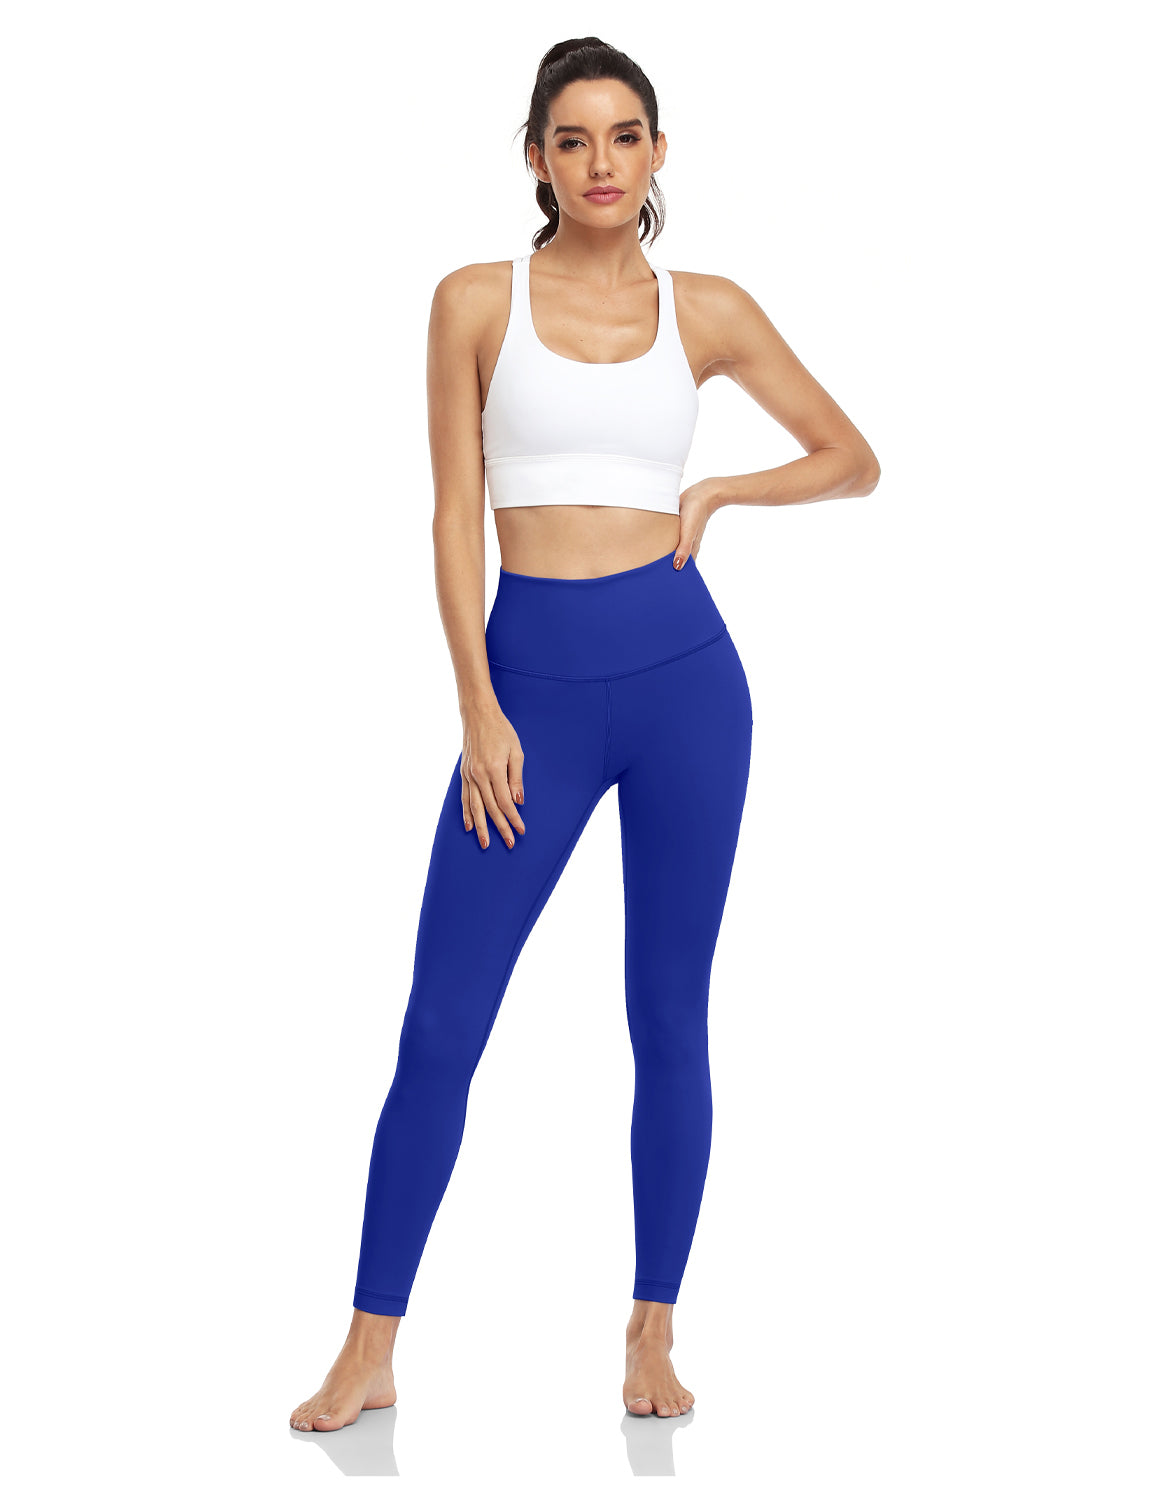  HeyNuts High Waisted Yoga Capris Leggings For Women, Buttery  Soft Workout Cropped Pants Compression 3/4 Leggings 21 Dazzling Blue S